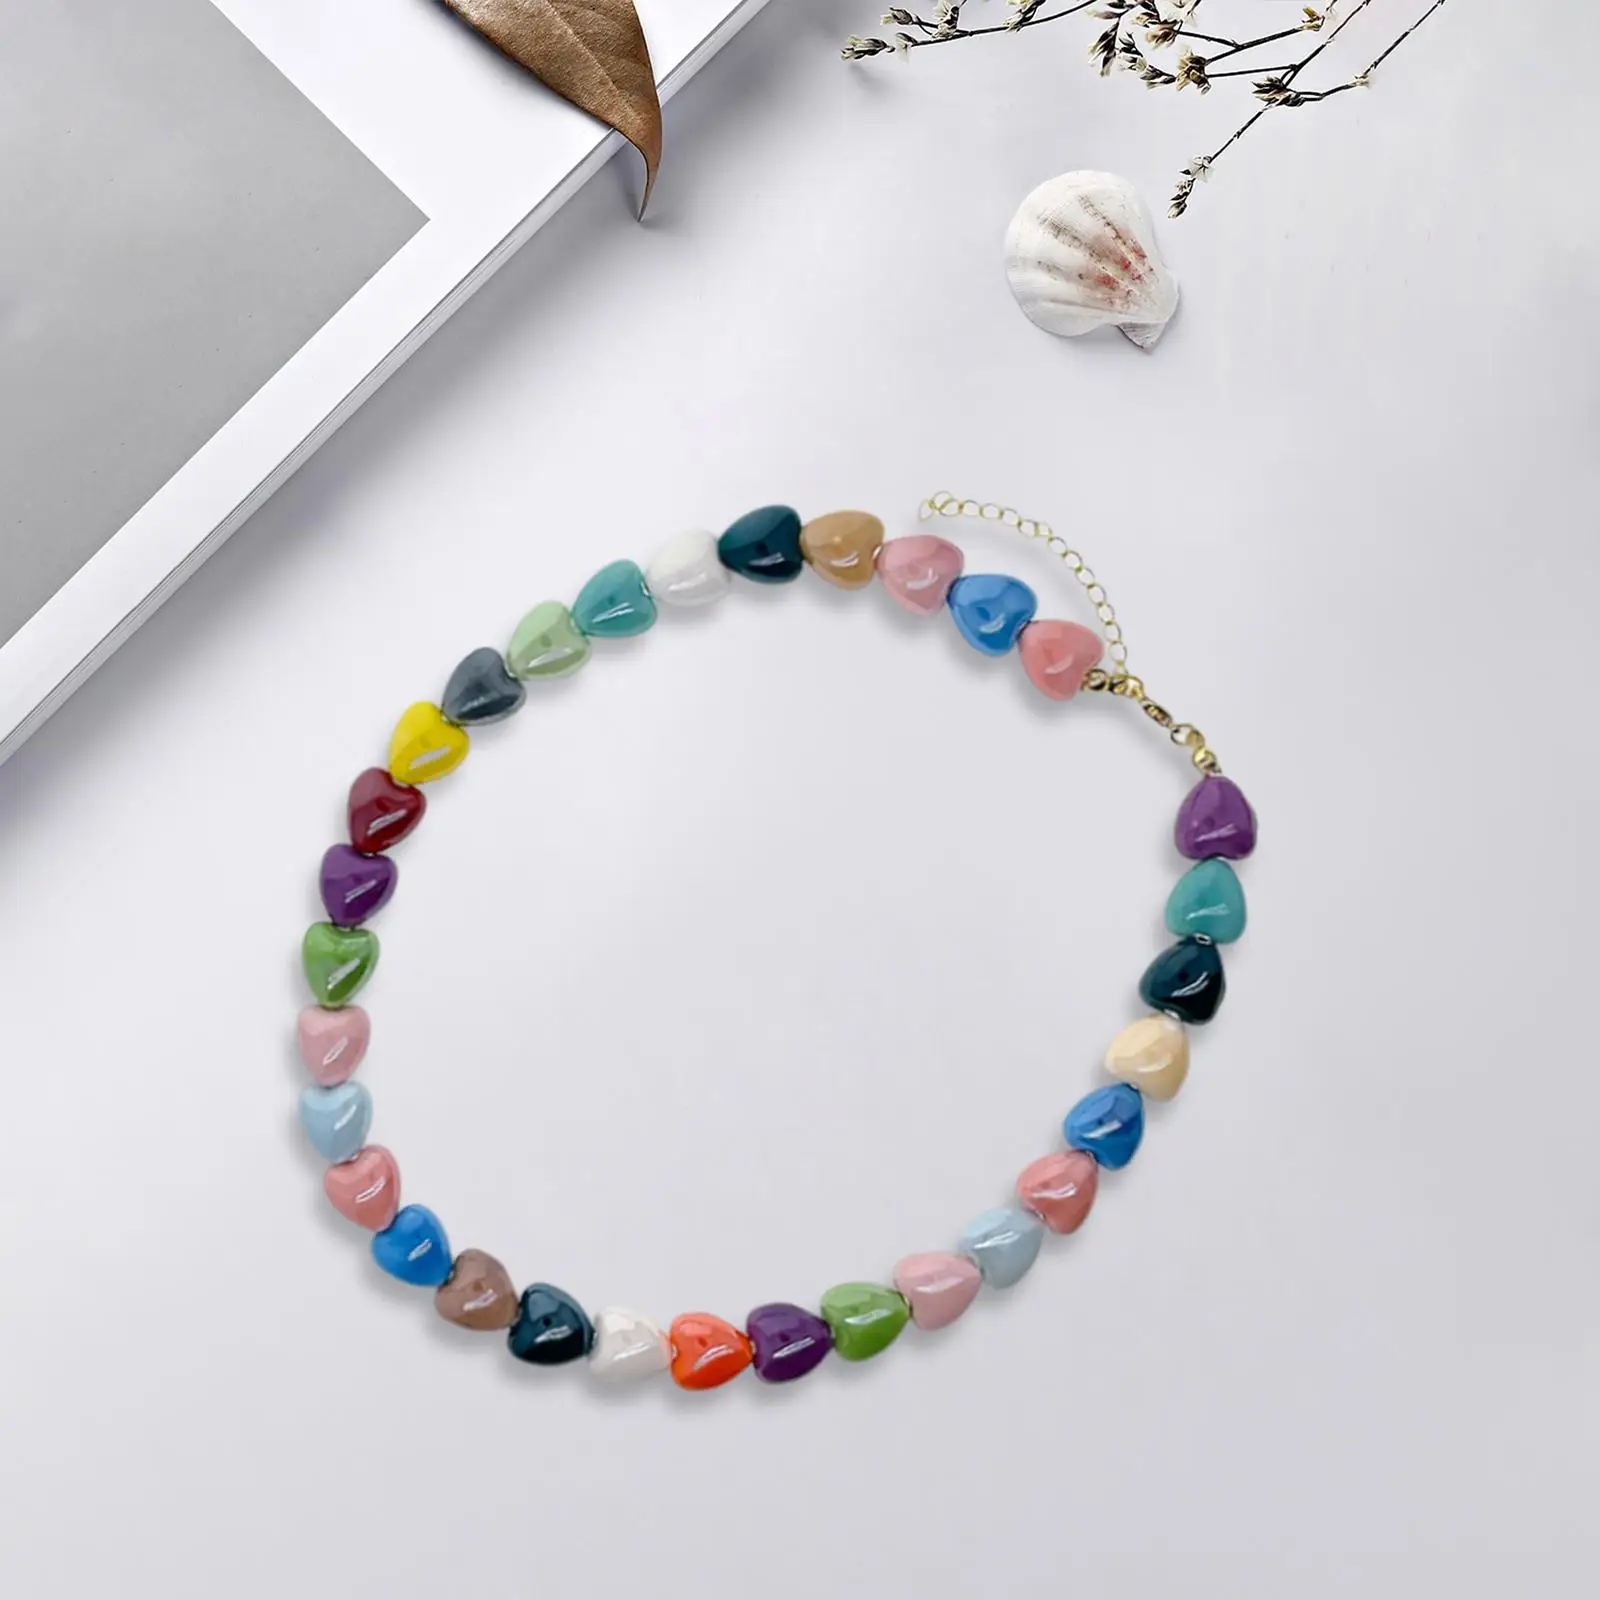 Colorful Ceramic Heart Shape Beads Necklace Sturdy for Wedding Anniversary Length 38cm, Extension Chain 5cm Stylish Handcrafted